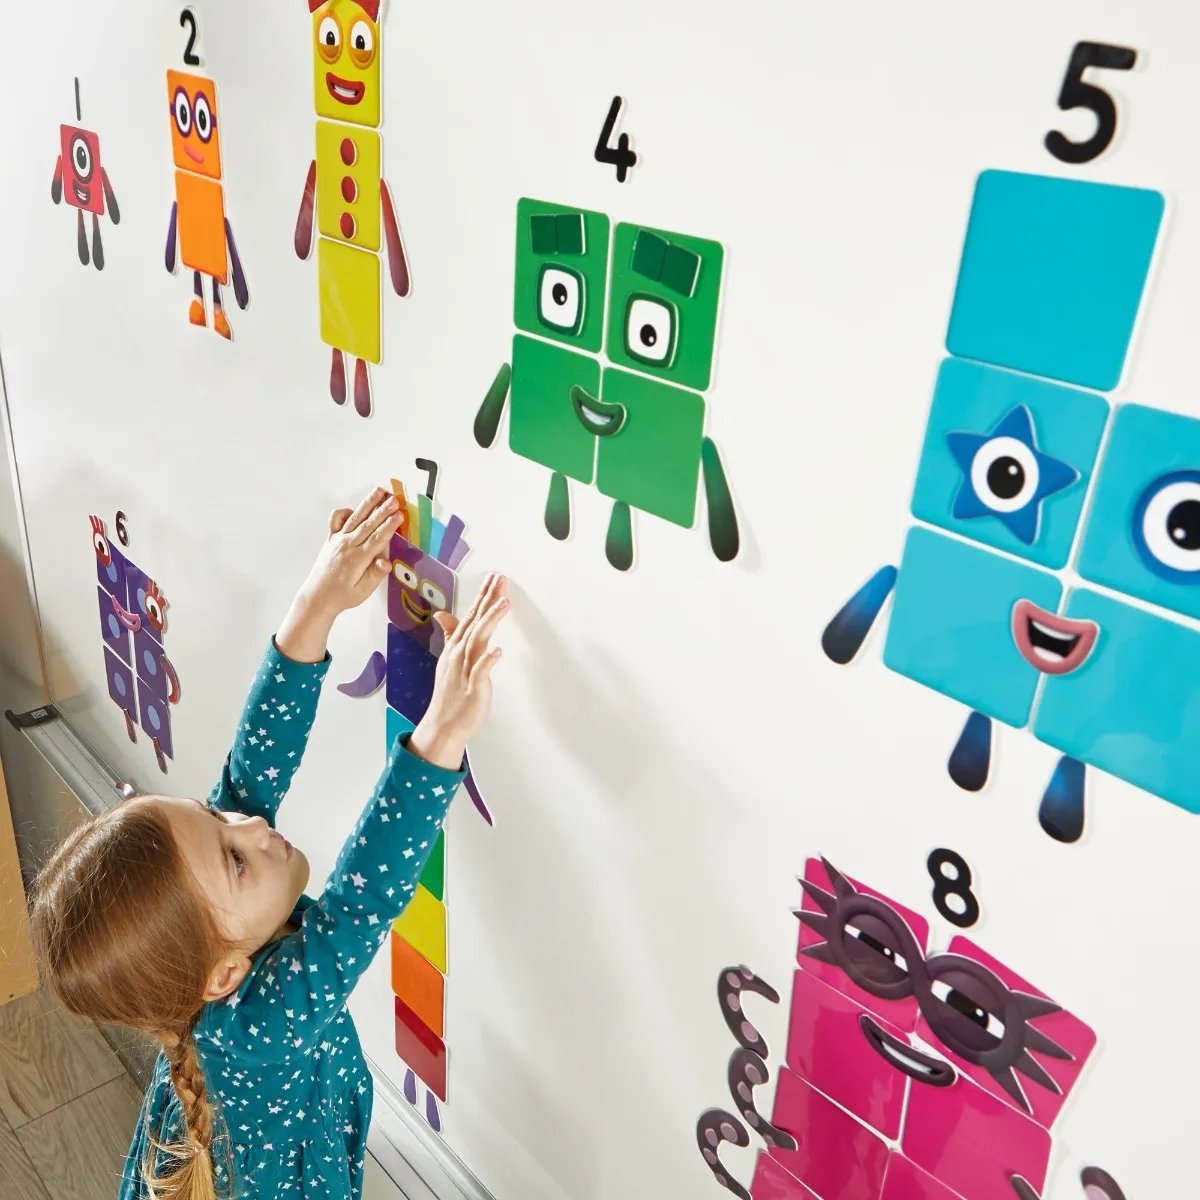 Numberblocks Reusable Clings, Recreate the Numberblocks One to Ten on smooth surfaces such as windows and whiteboards and bring the number magic from the award-winning Numberblocks TV series to life in news ways for young children. Made from an innovative, durable material, Numberblocks Reusable Clings are easy to DIY, and can be repositioned over and over again. This Numberblocks Reusable Clings set has all the pieces needed to recreate Numberblocks One to Ten with extra poses for Four, Five, Eight, Nine a